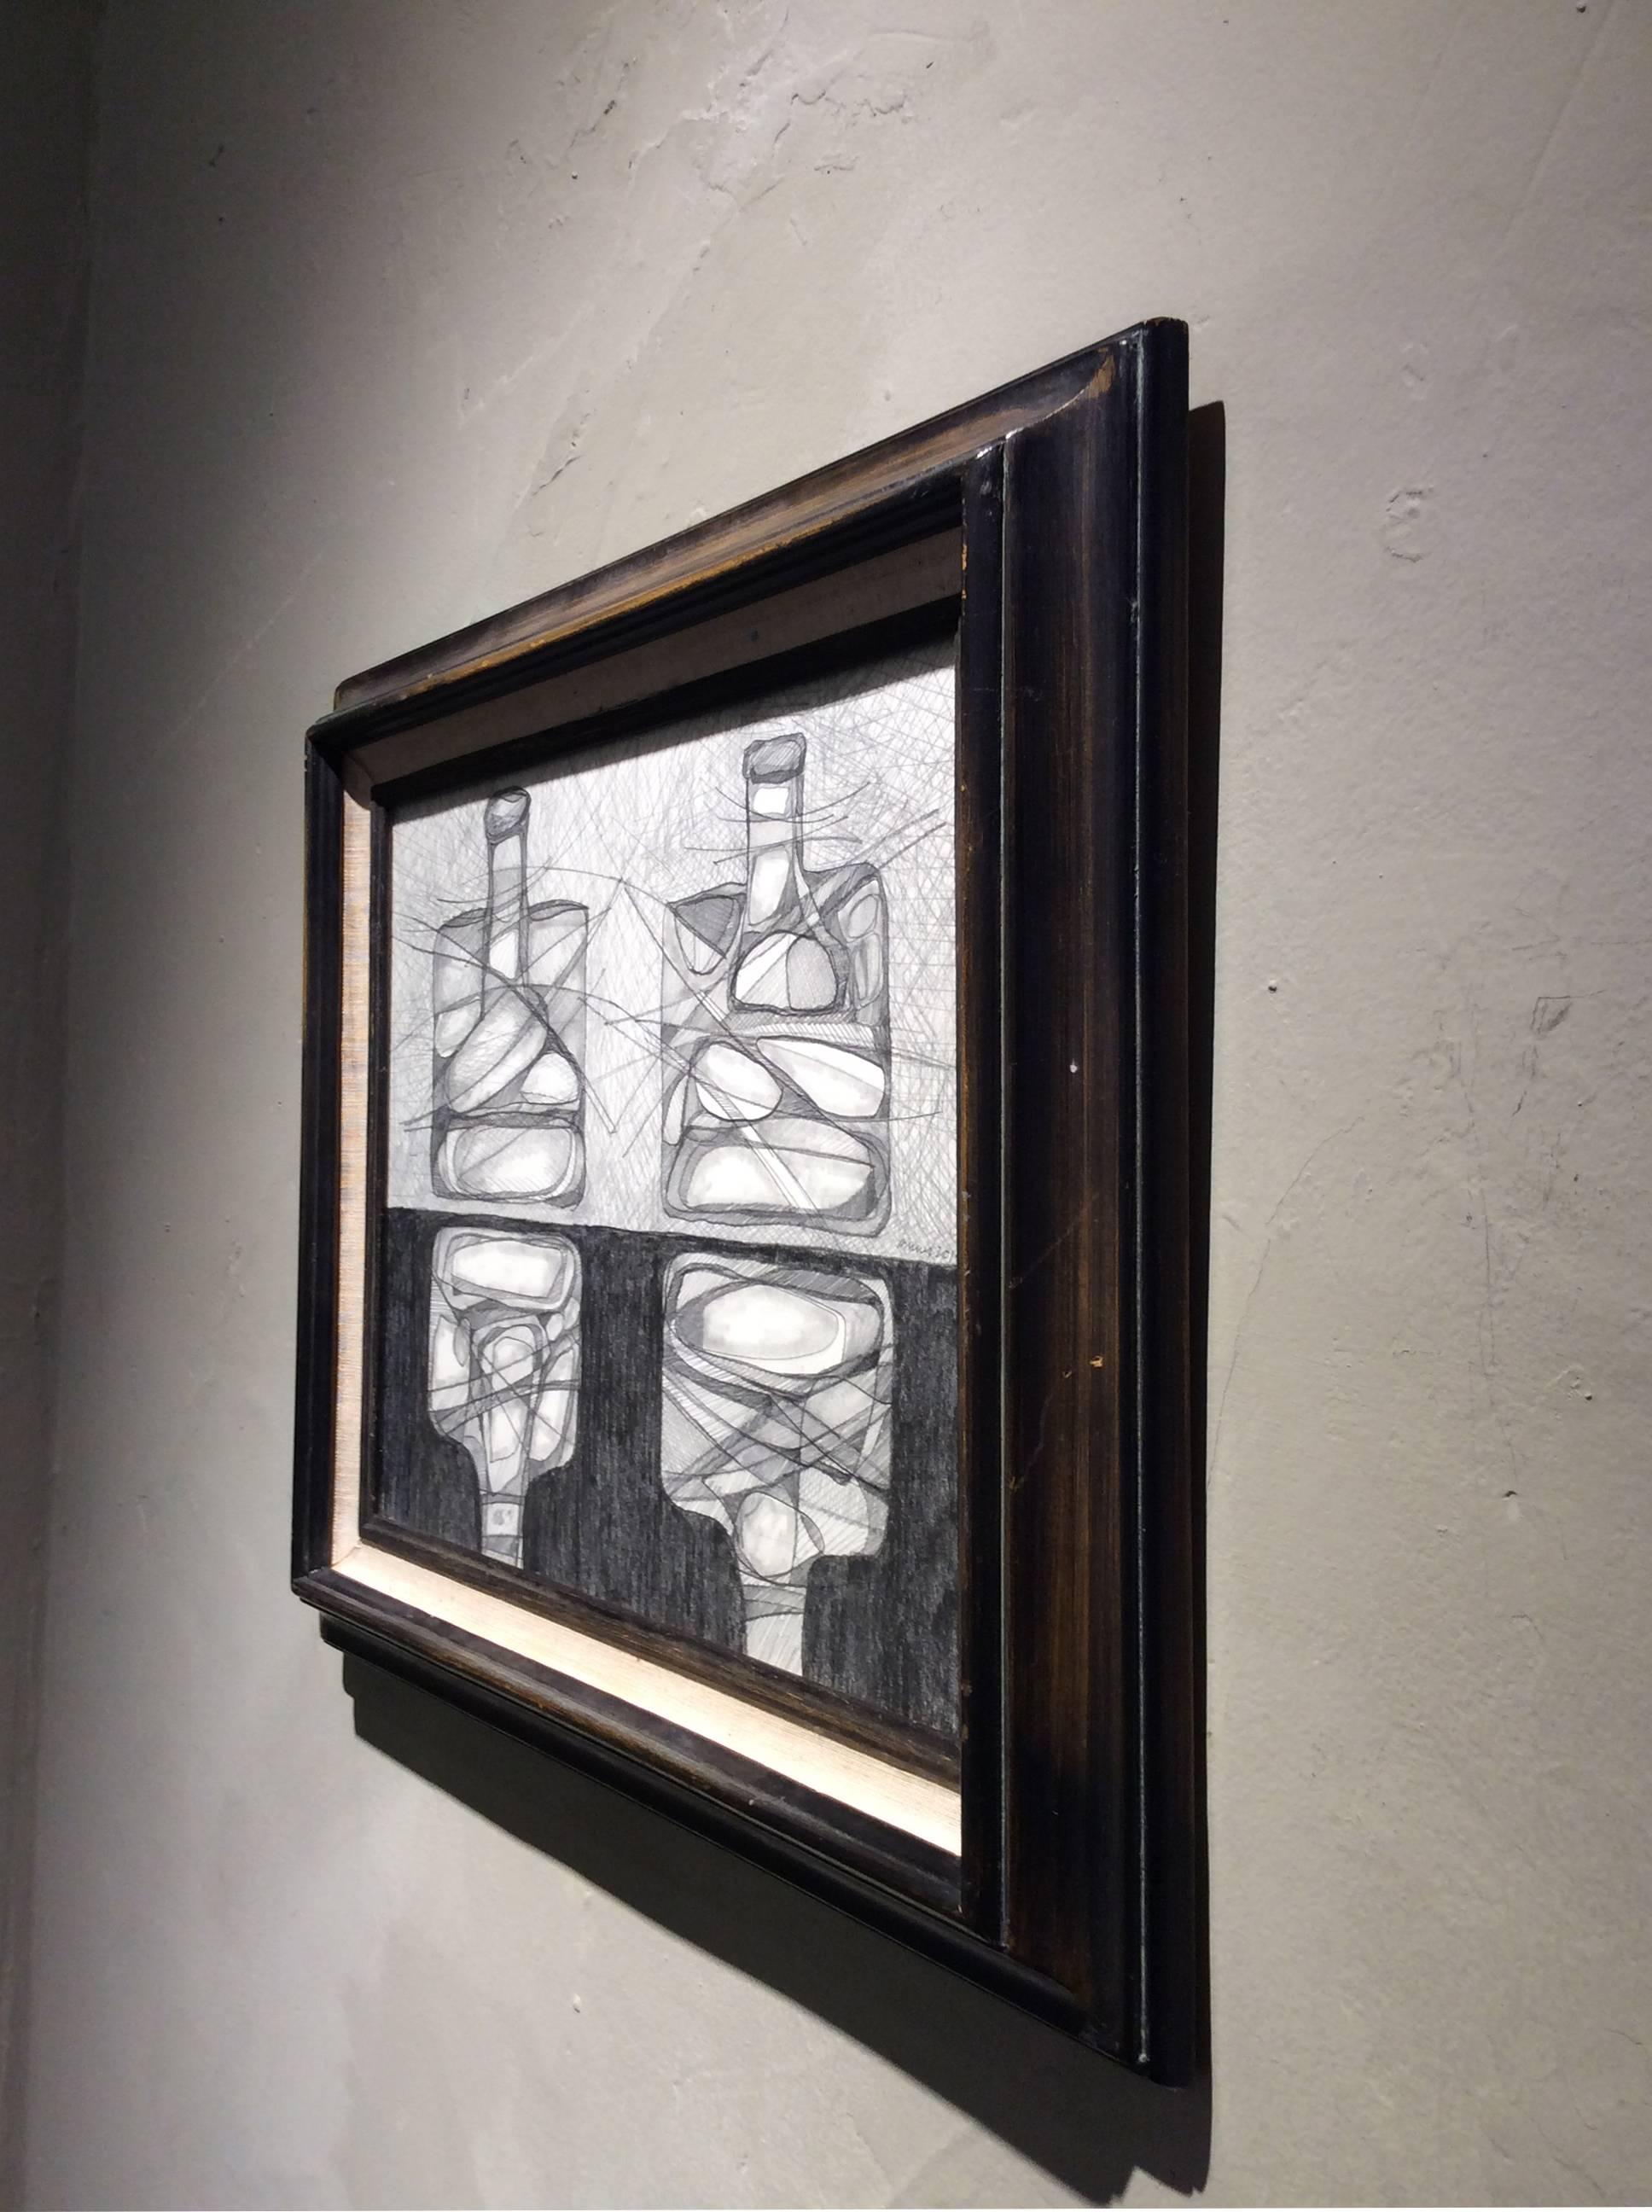 Two Morandi Bottles: Abstract Cubist Style, Modern Drawing in Vintage Wood Frame - Black Abstract Drawing by David Dew Bruner